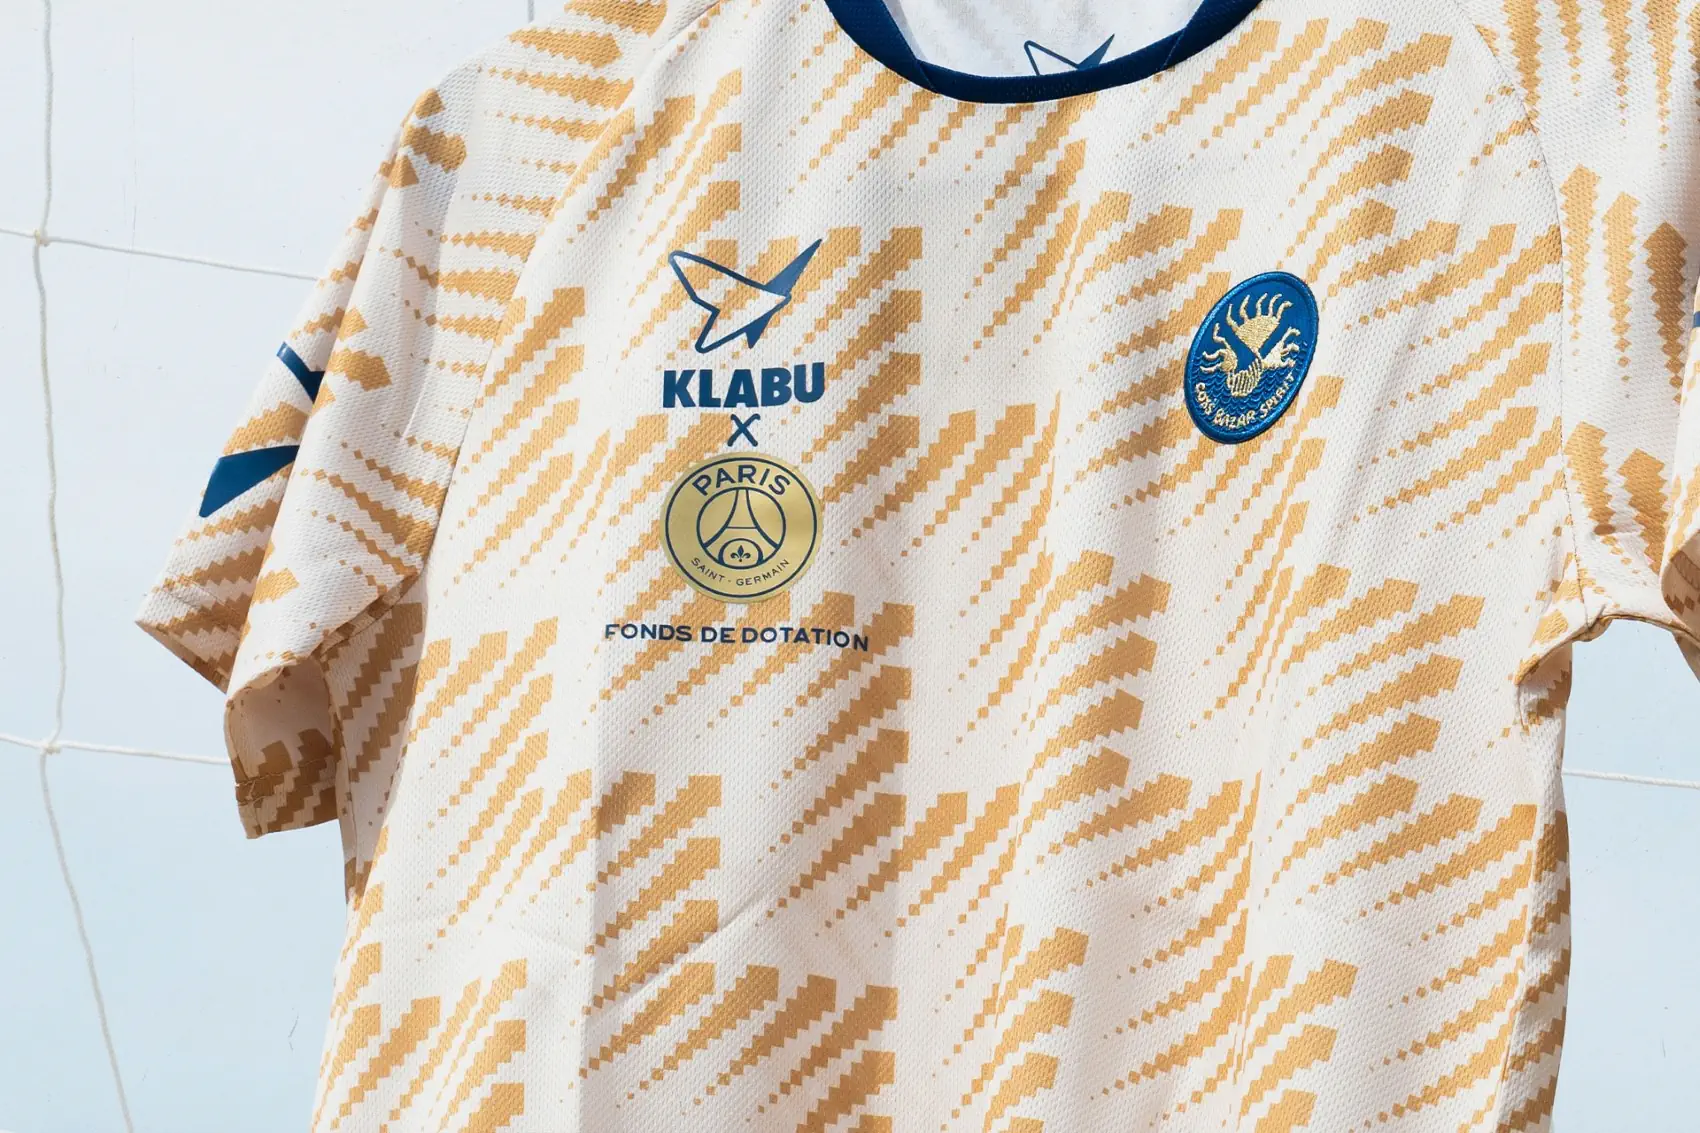 Paris Saint-Germain and Solidarity Start-up KLABU Unite for a Cause with an Exclusive Jersey